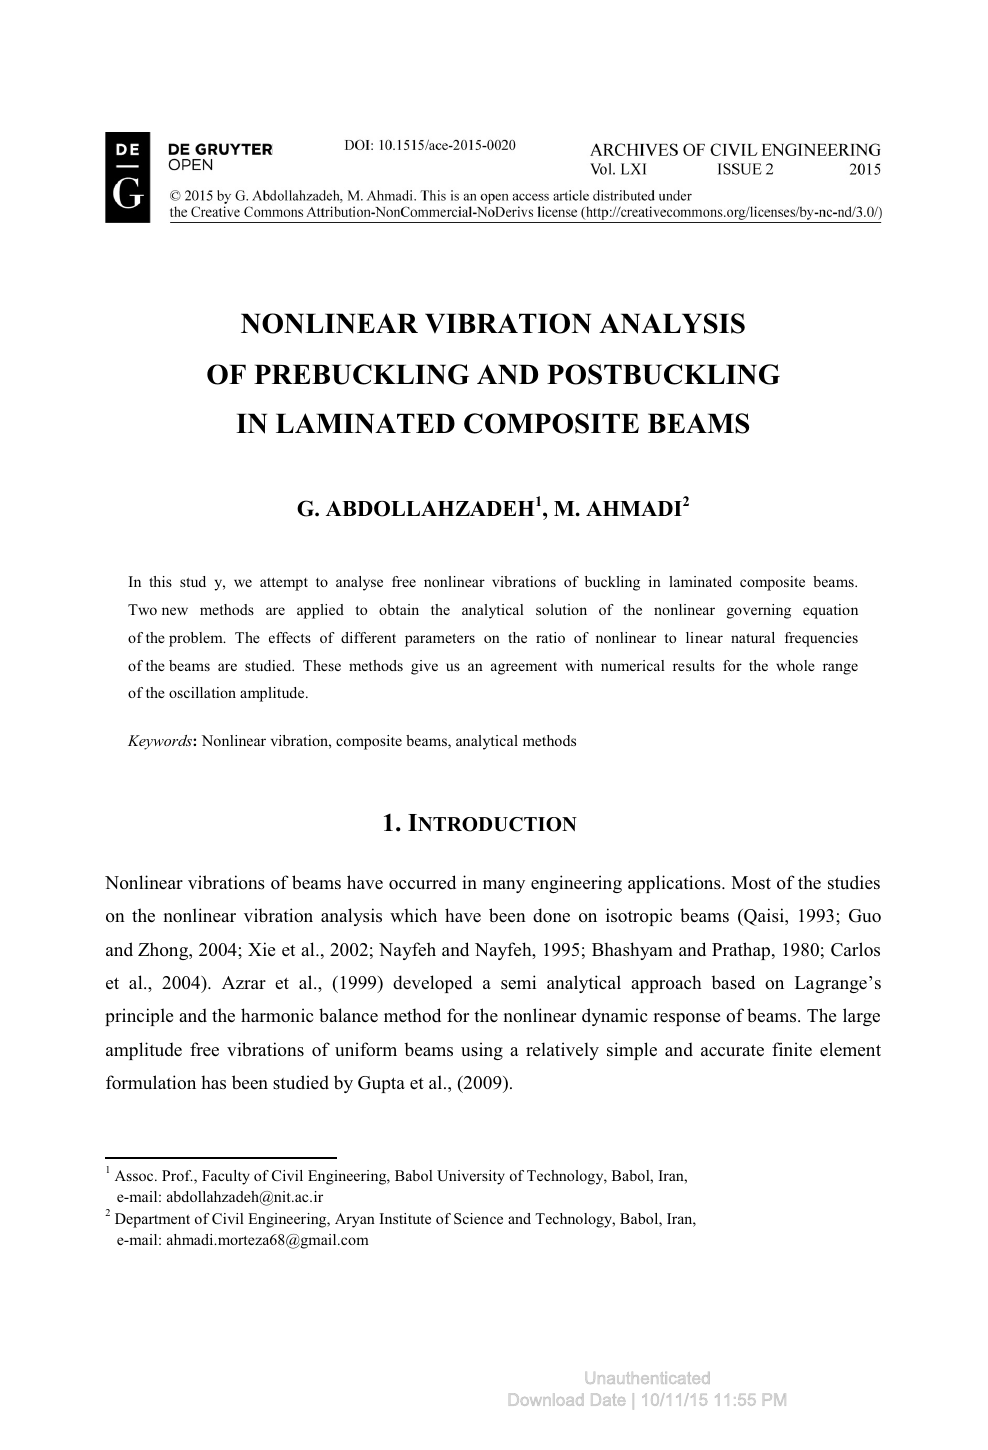 Nonlinear Vibration Analysis Of Prebuckling And Postbuckling In Laminated Composite Beams Topic Of Research Paper In Civil Engineering Download Scholarly Article Pdf And Read For Free On Cyberleninka Open Science Hub